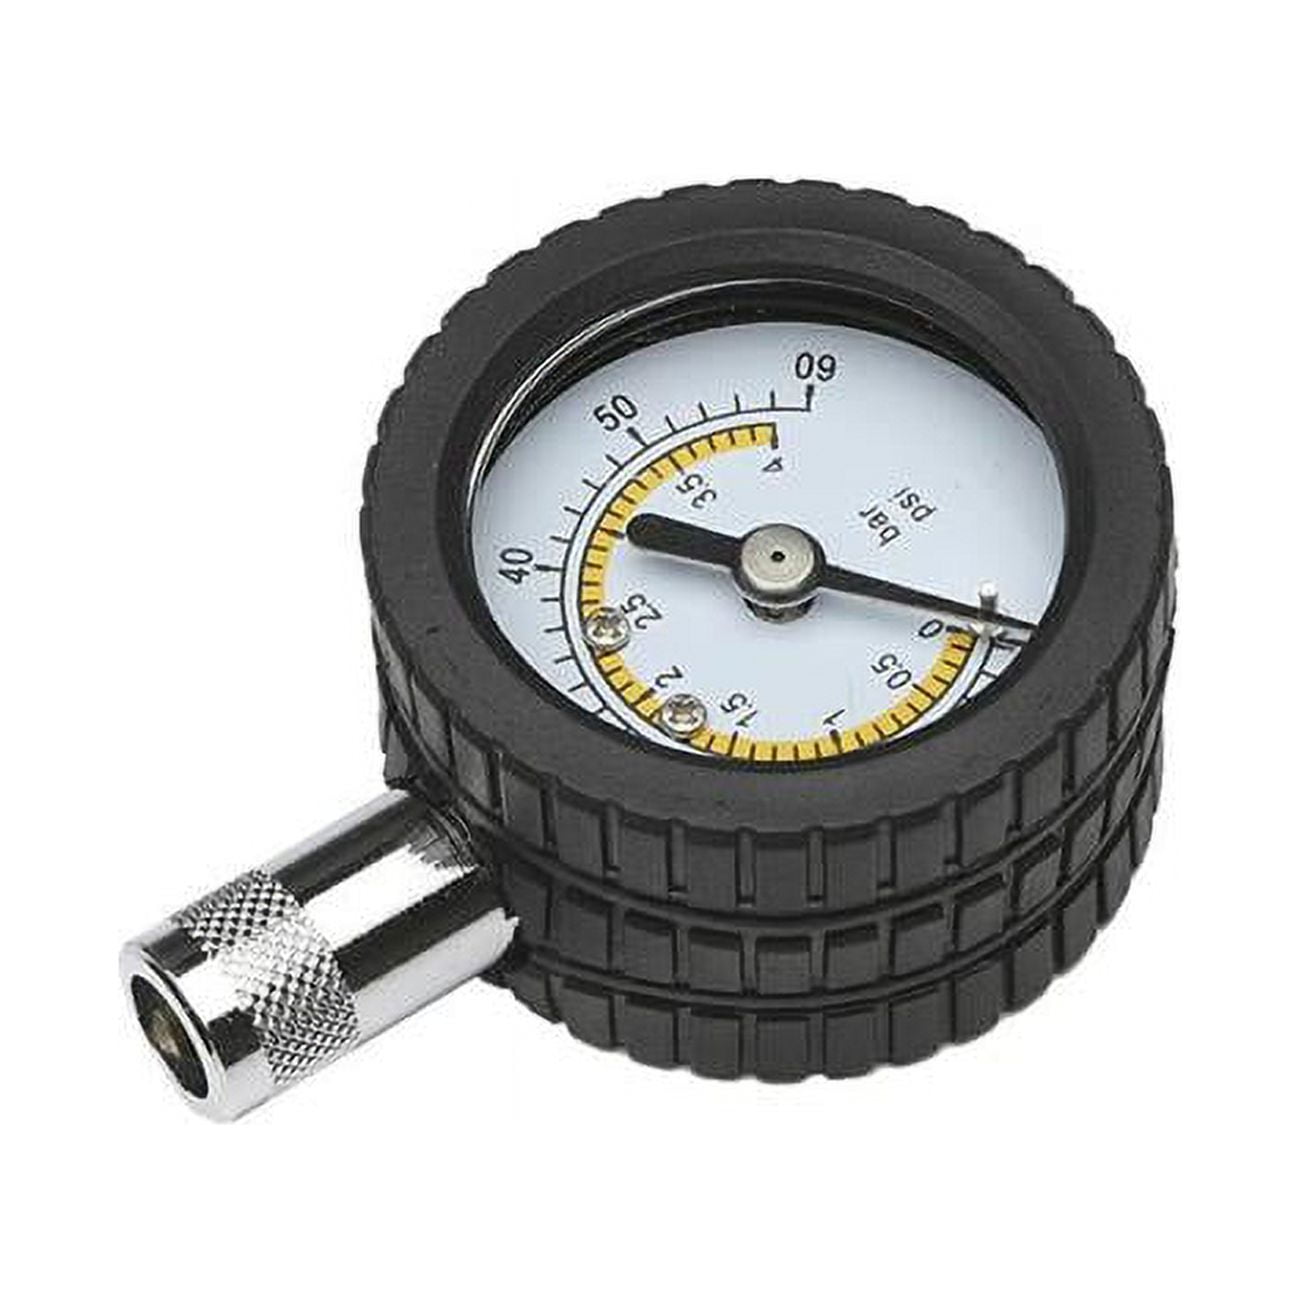 Picture of Allied 45484 60 PSI Mini Dial Tire Gauge